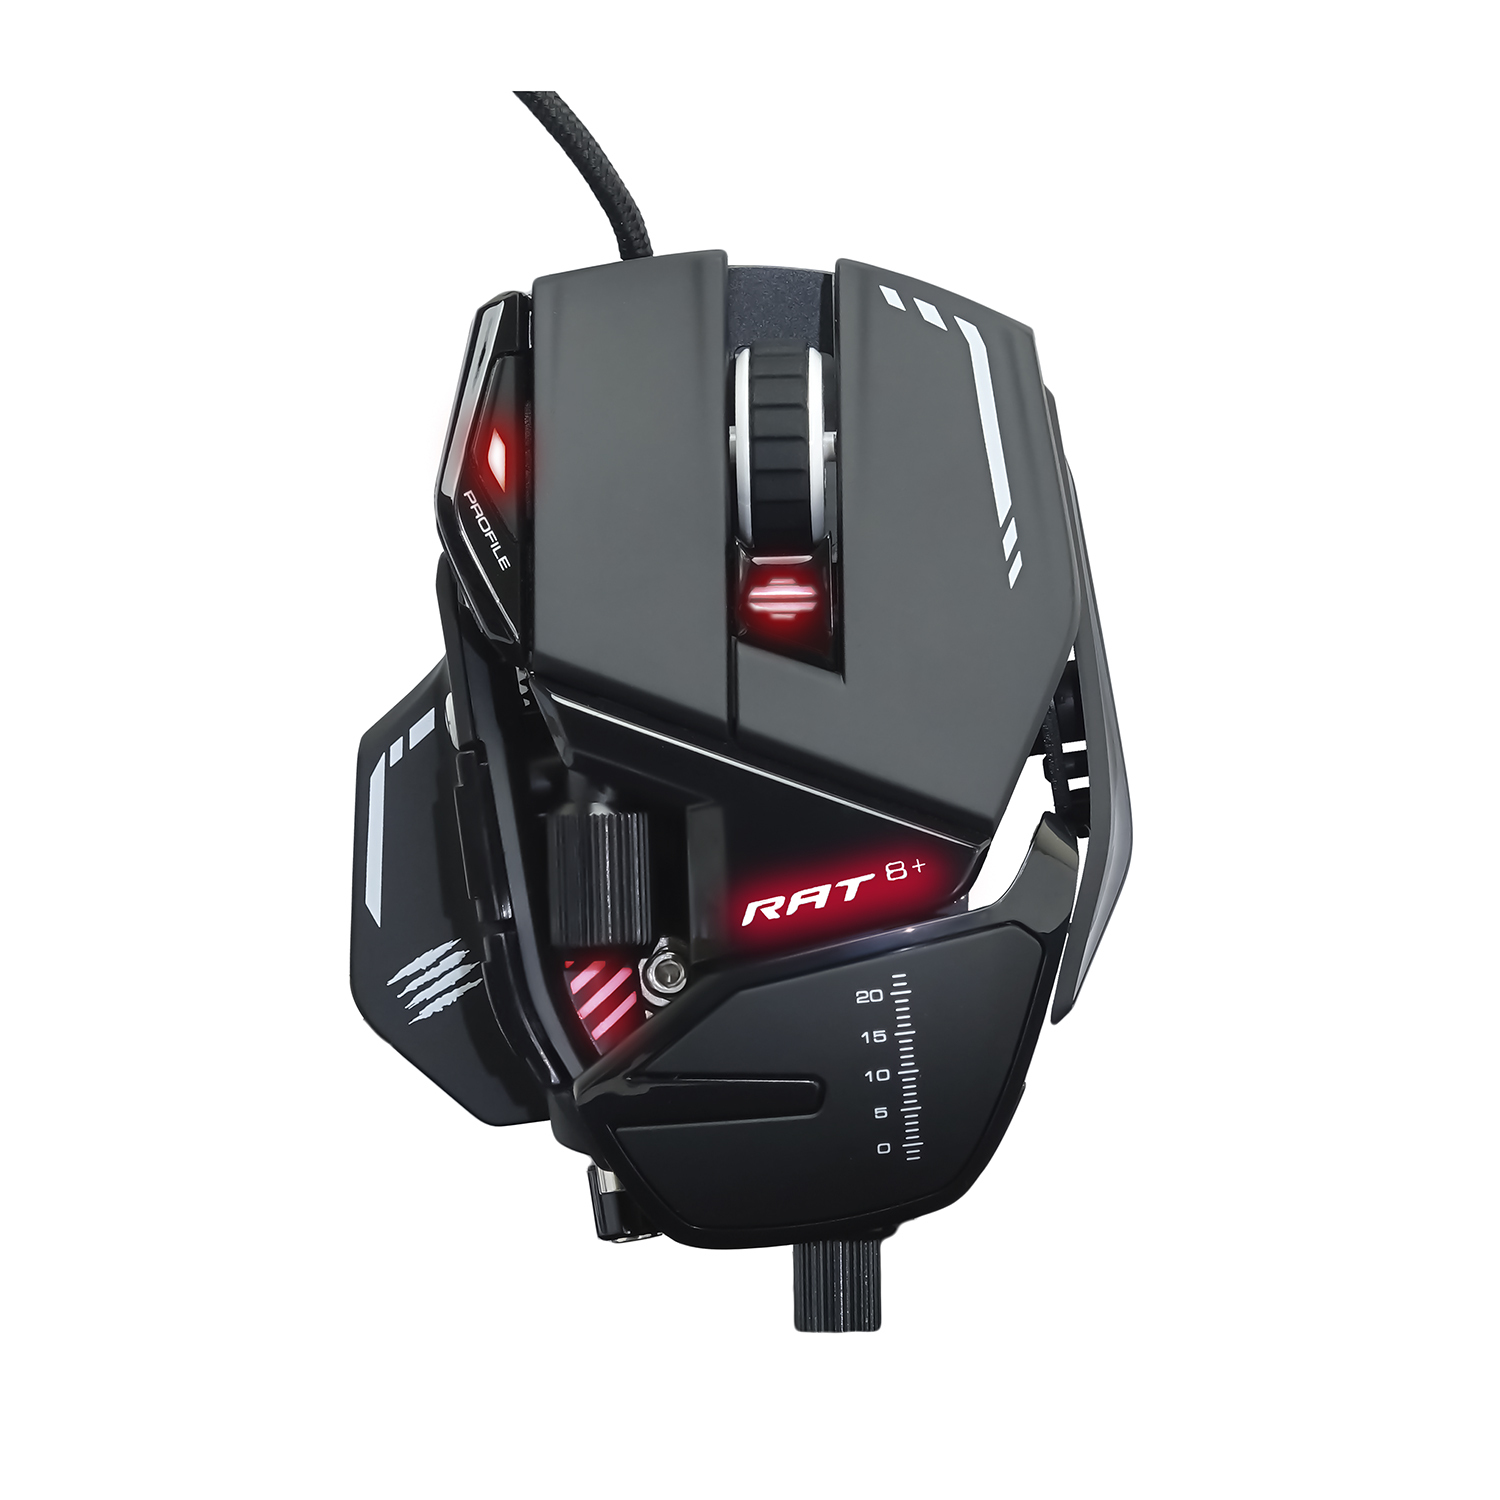 Mad Catz R.A.T. 8+ Optical Gaming Mouse